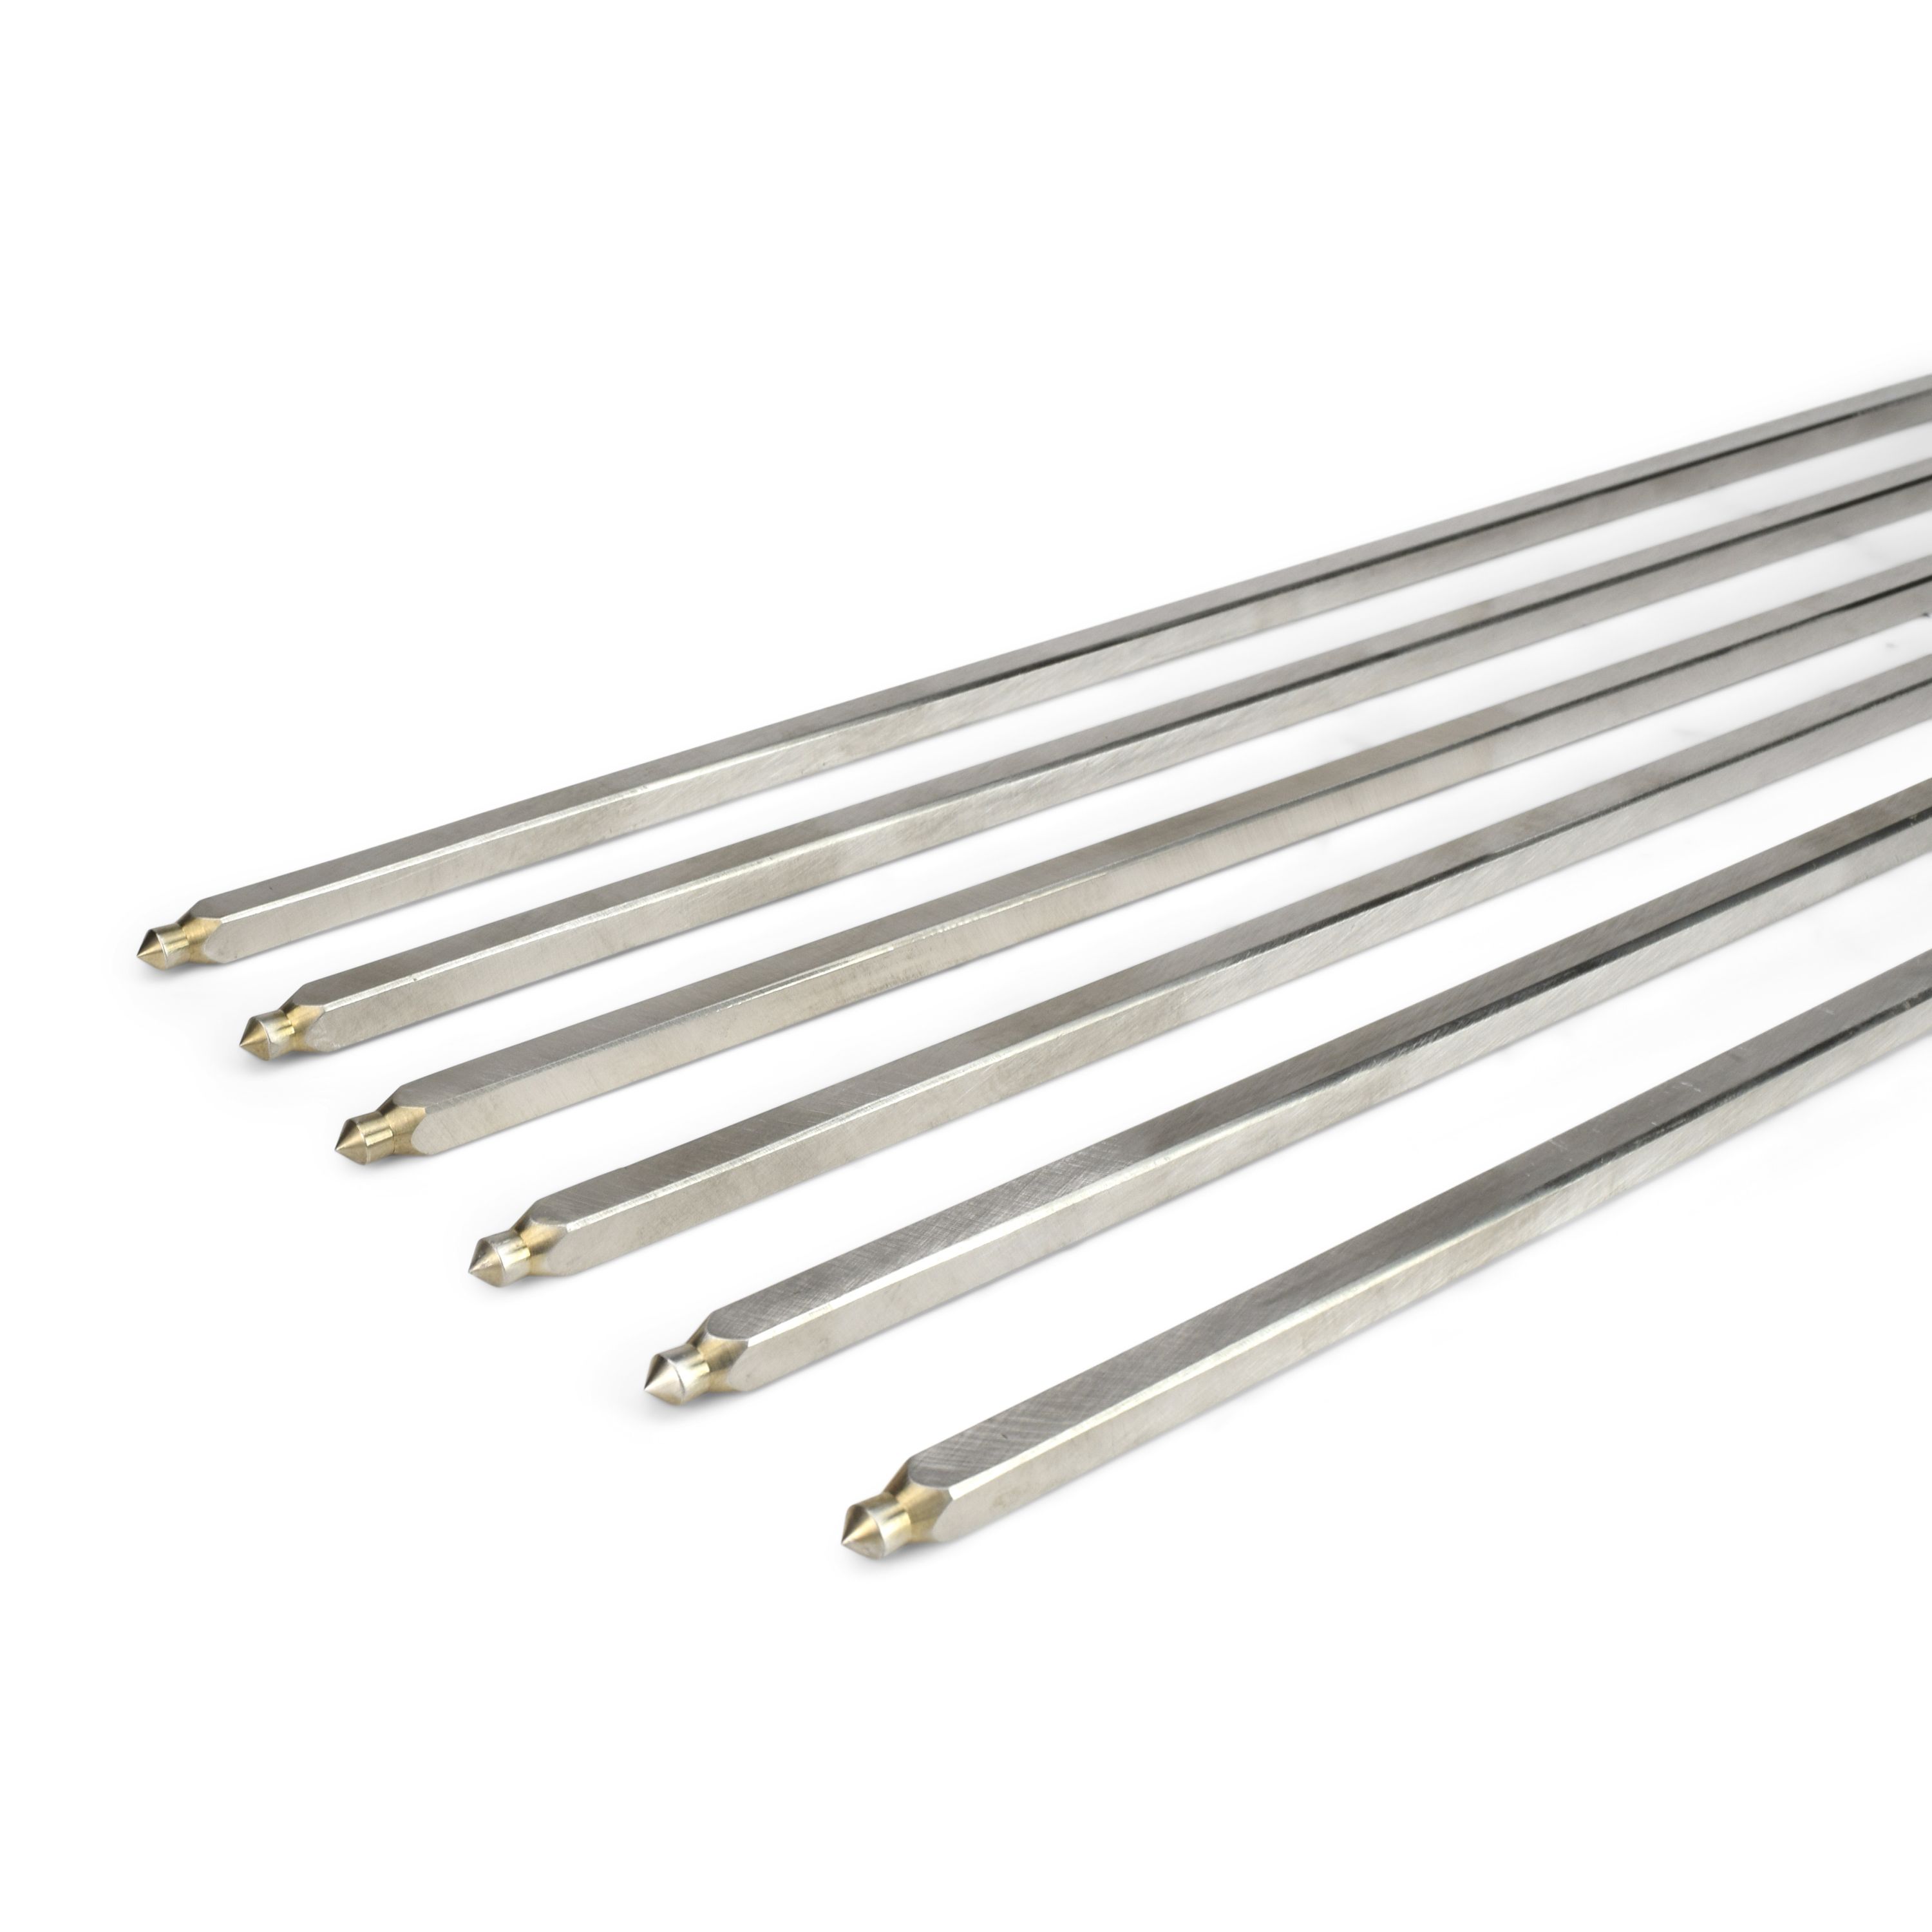 6 pieces replacement skewers stainless steel for the asado holder